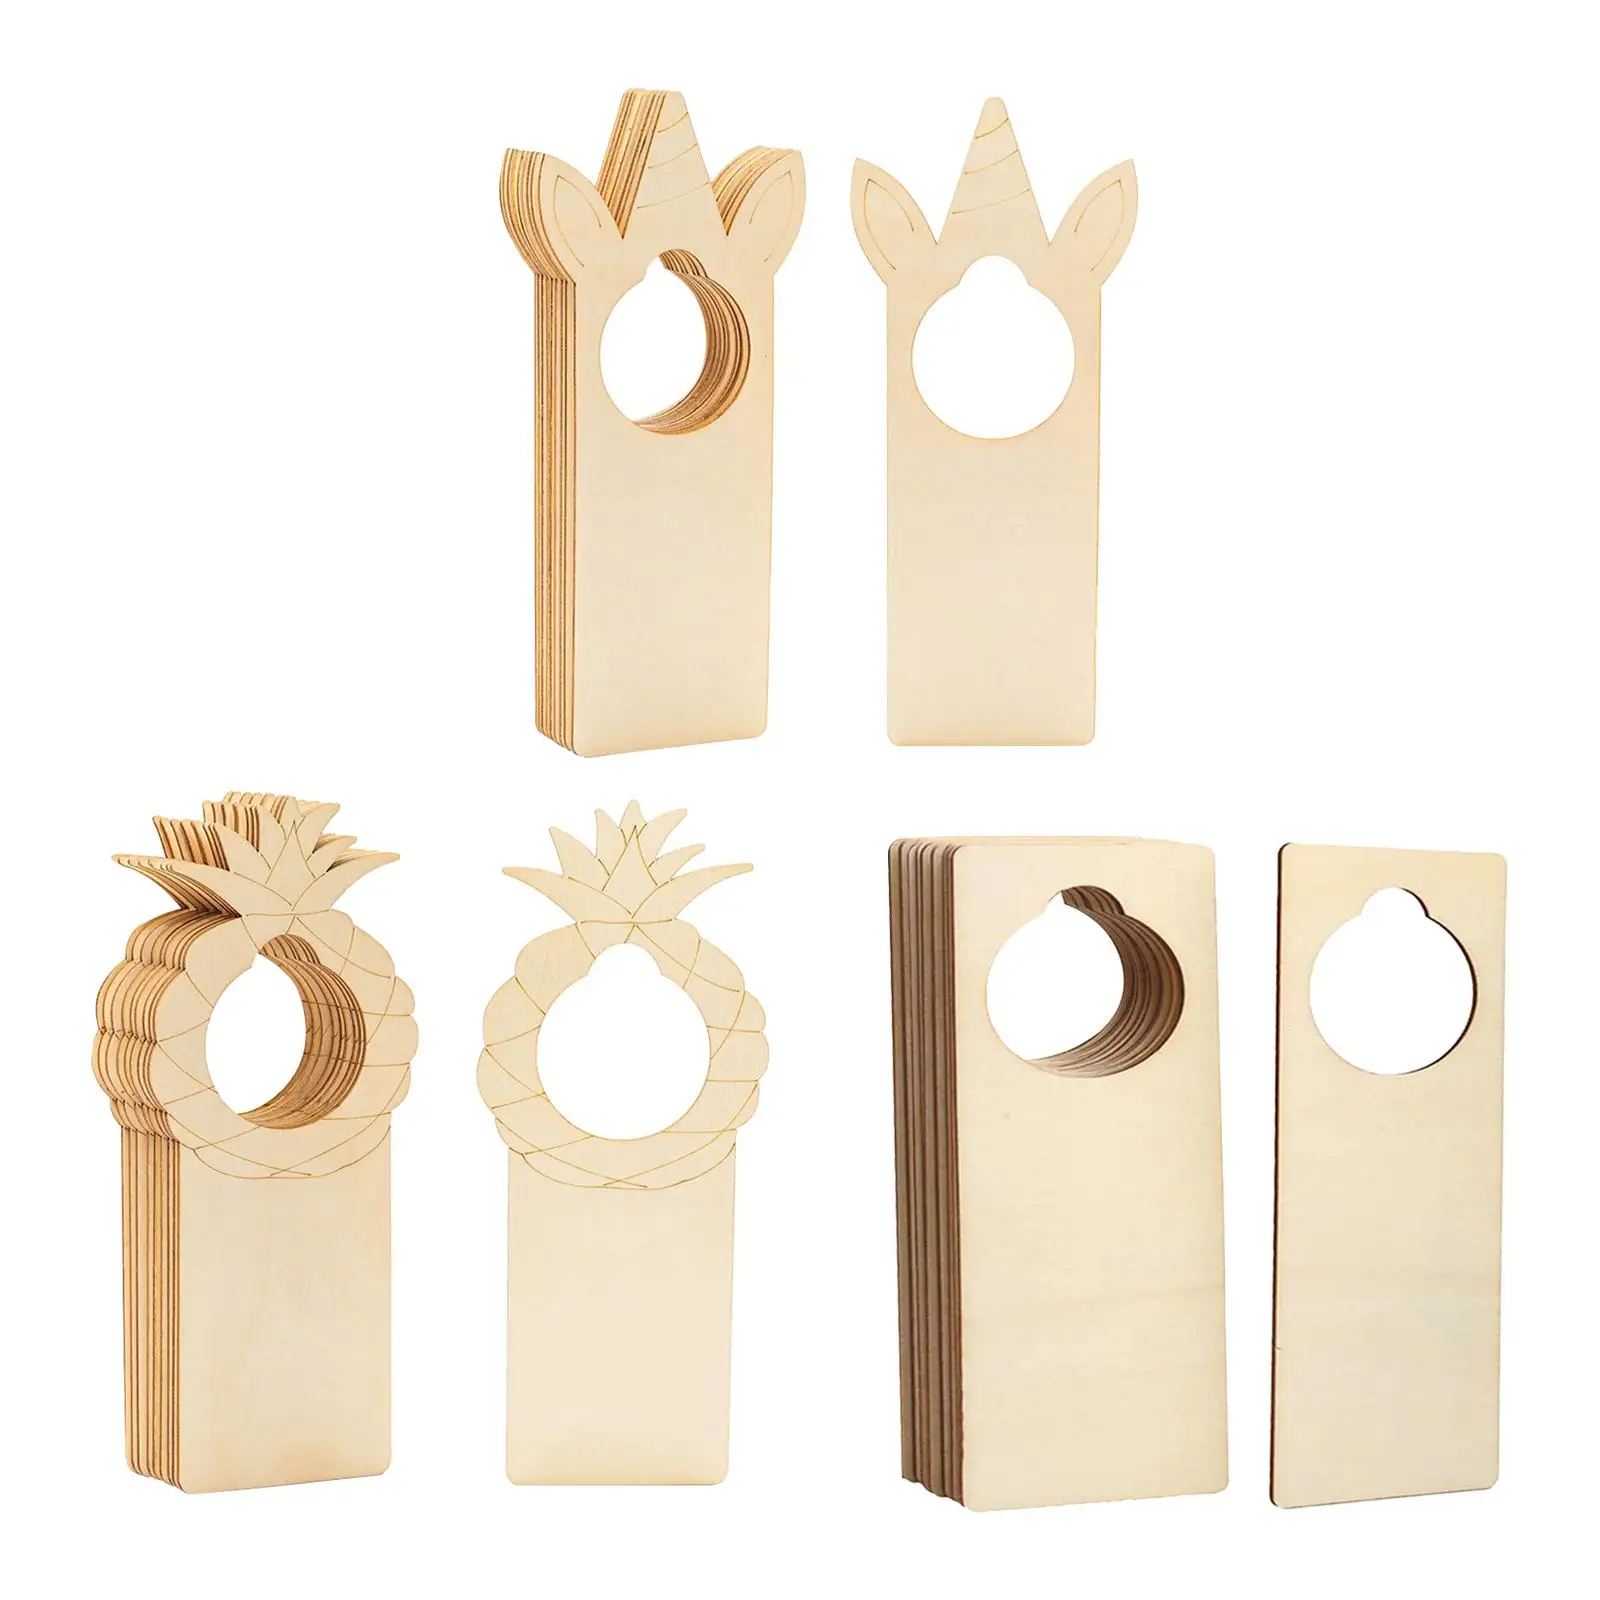 10 Pieces Unfinished Wood Door Knob Hangers Ornaments Slice Lightweight Hanging Tags for Painting Business Use Office Dorm Decor